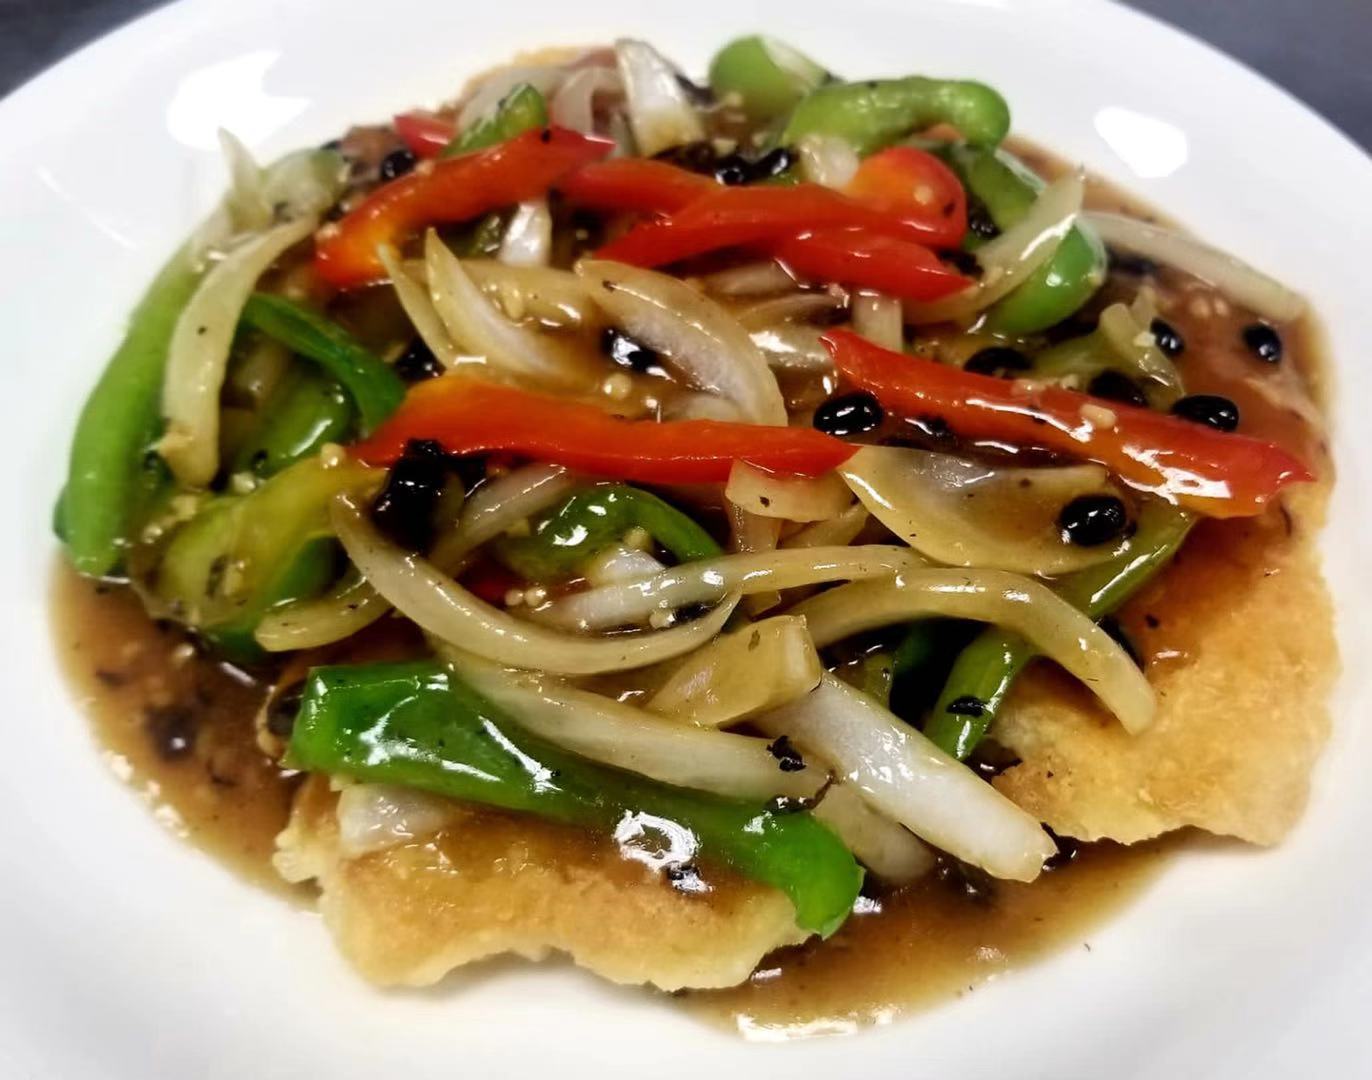 147. Fried Fish Fillet with Black Bean and Chili Sauce